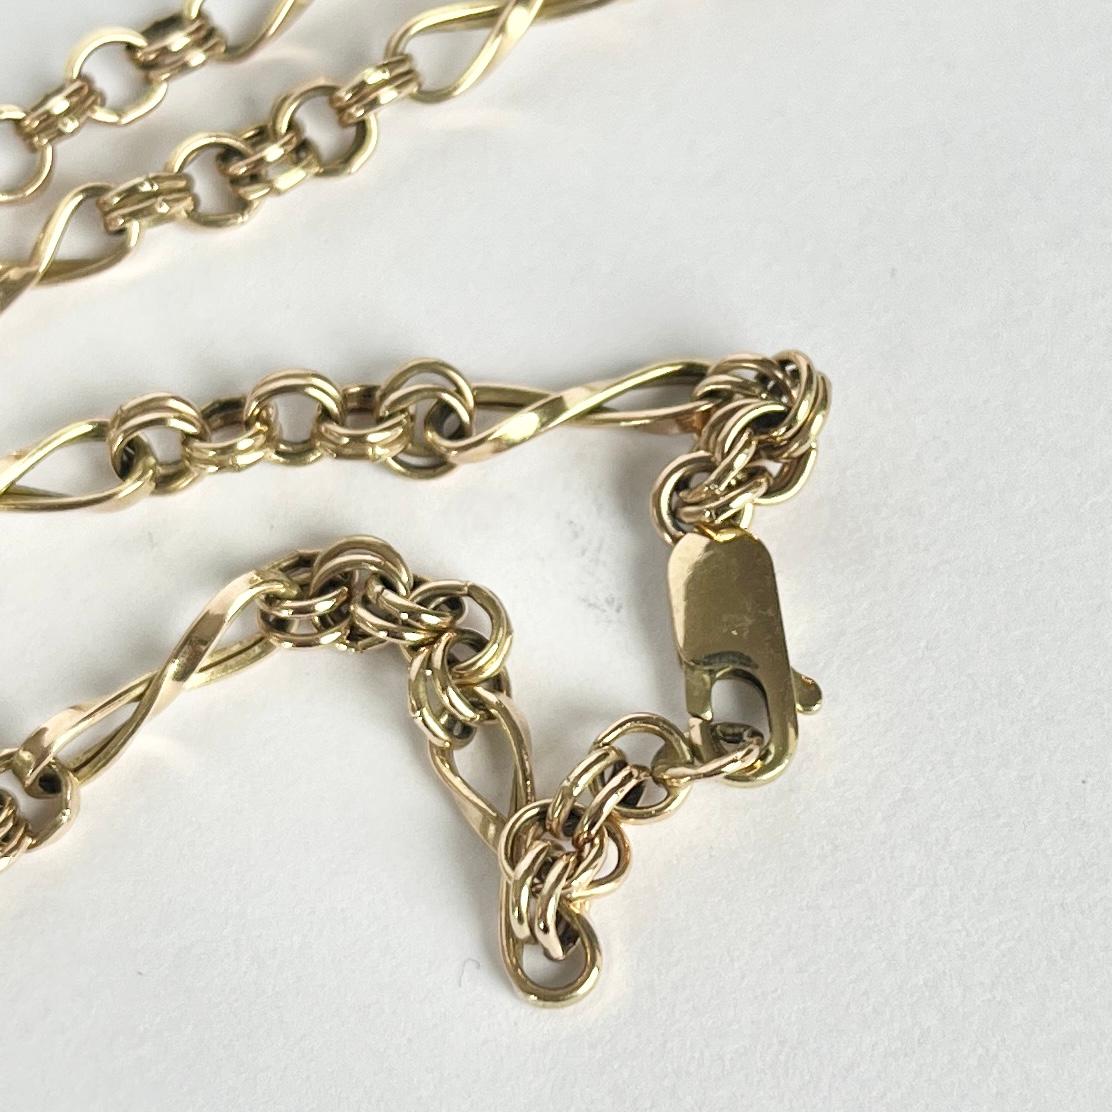 Vintage 9 Carat Gold Chain  Necklace In Good Condition For Sale In Chipping Campden, GB